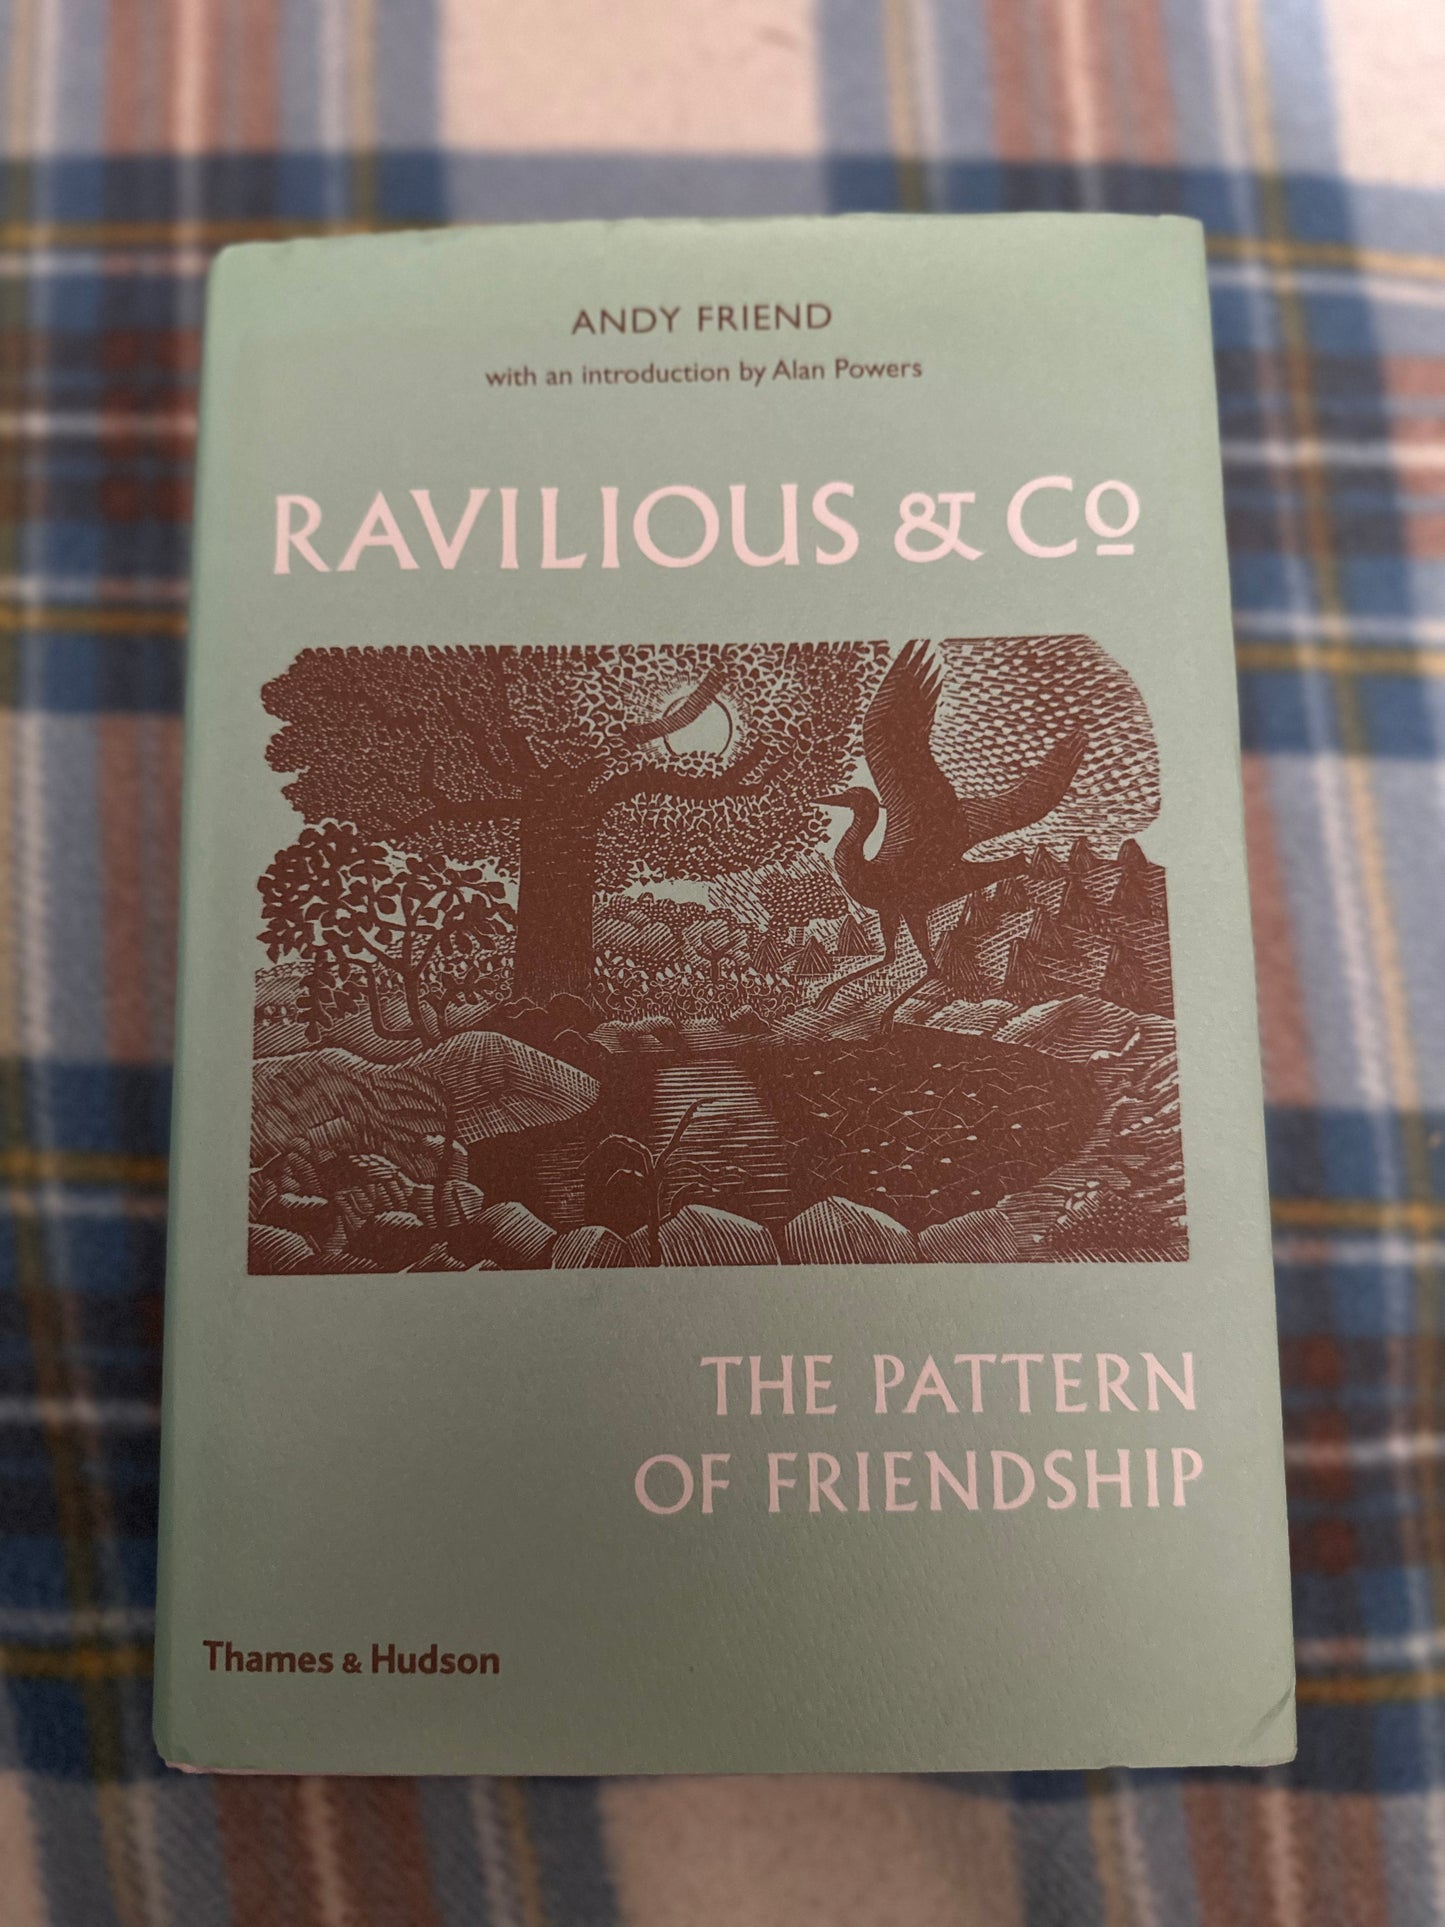 2017*1st* Ravilious & Co. The Pattern Of Friendship - Andy Friend